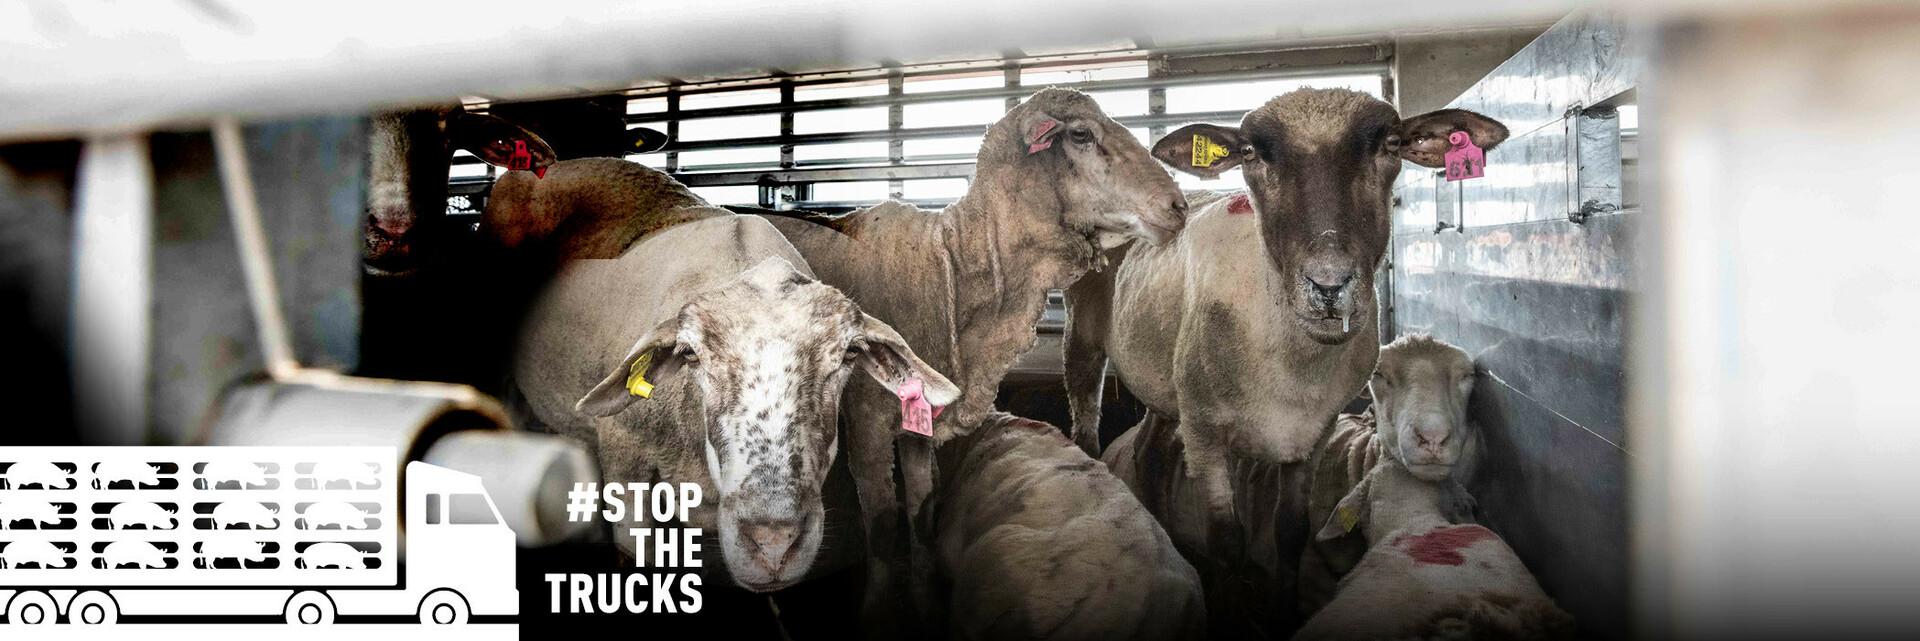 StopTheTrucks - a FOUR PAWS Campaign against Live Animal Transport in Europe